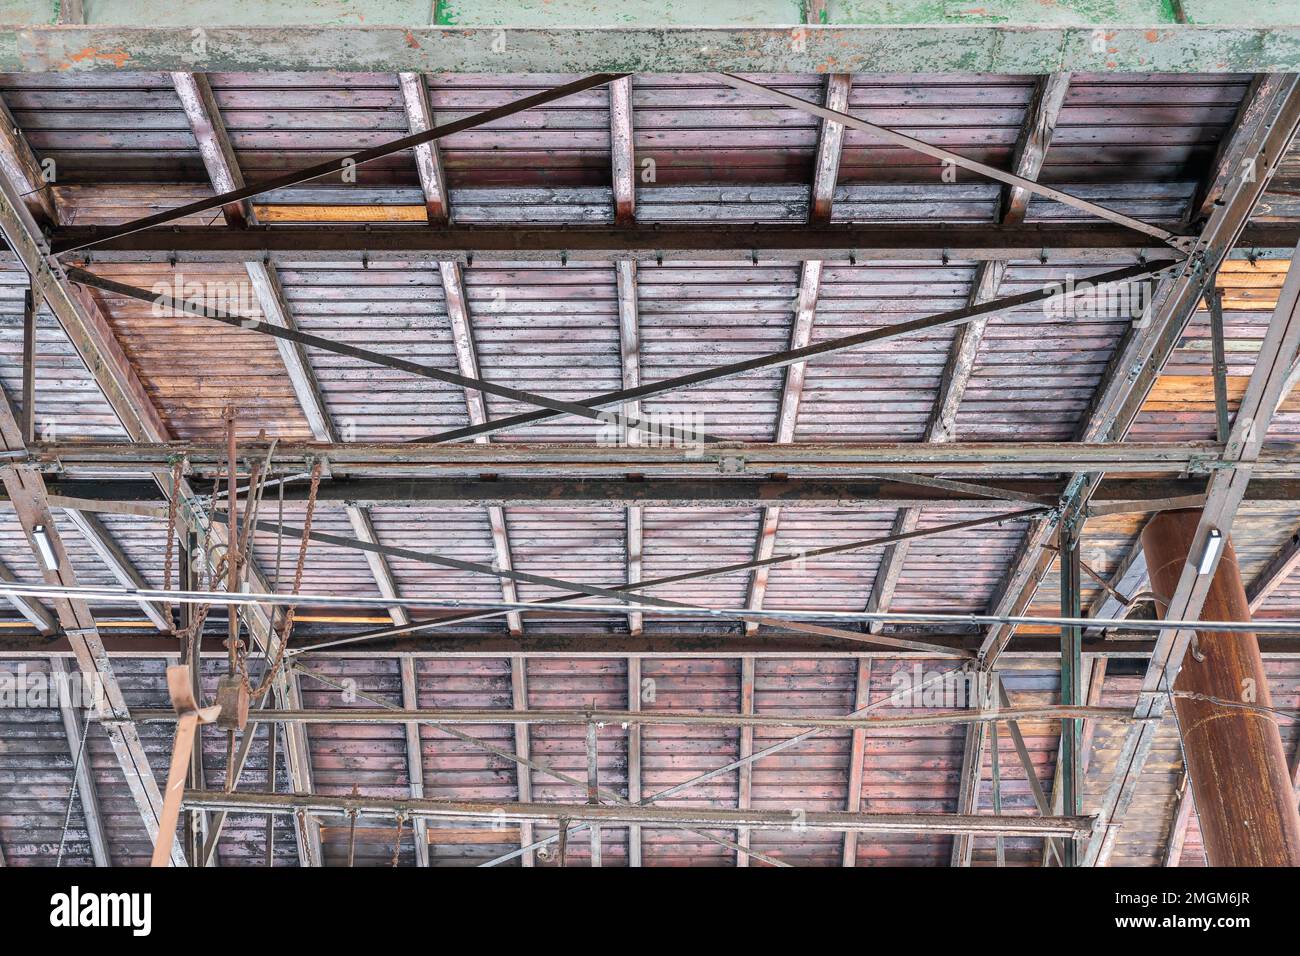 Gable roof truss of a large, vintage factory hall. Roofing construction (sheathing) made of wooden planks. Industrial interior. Stock Photo